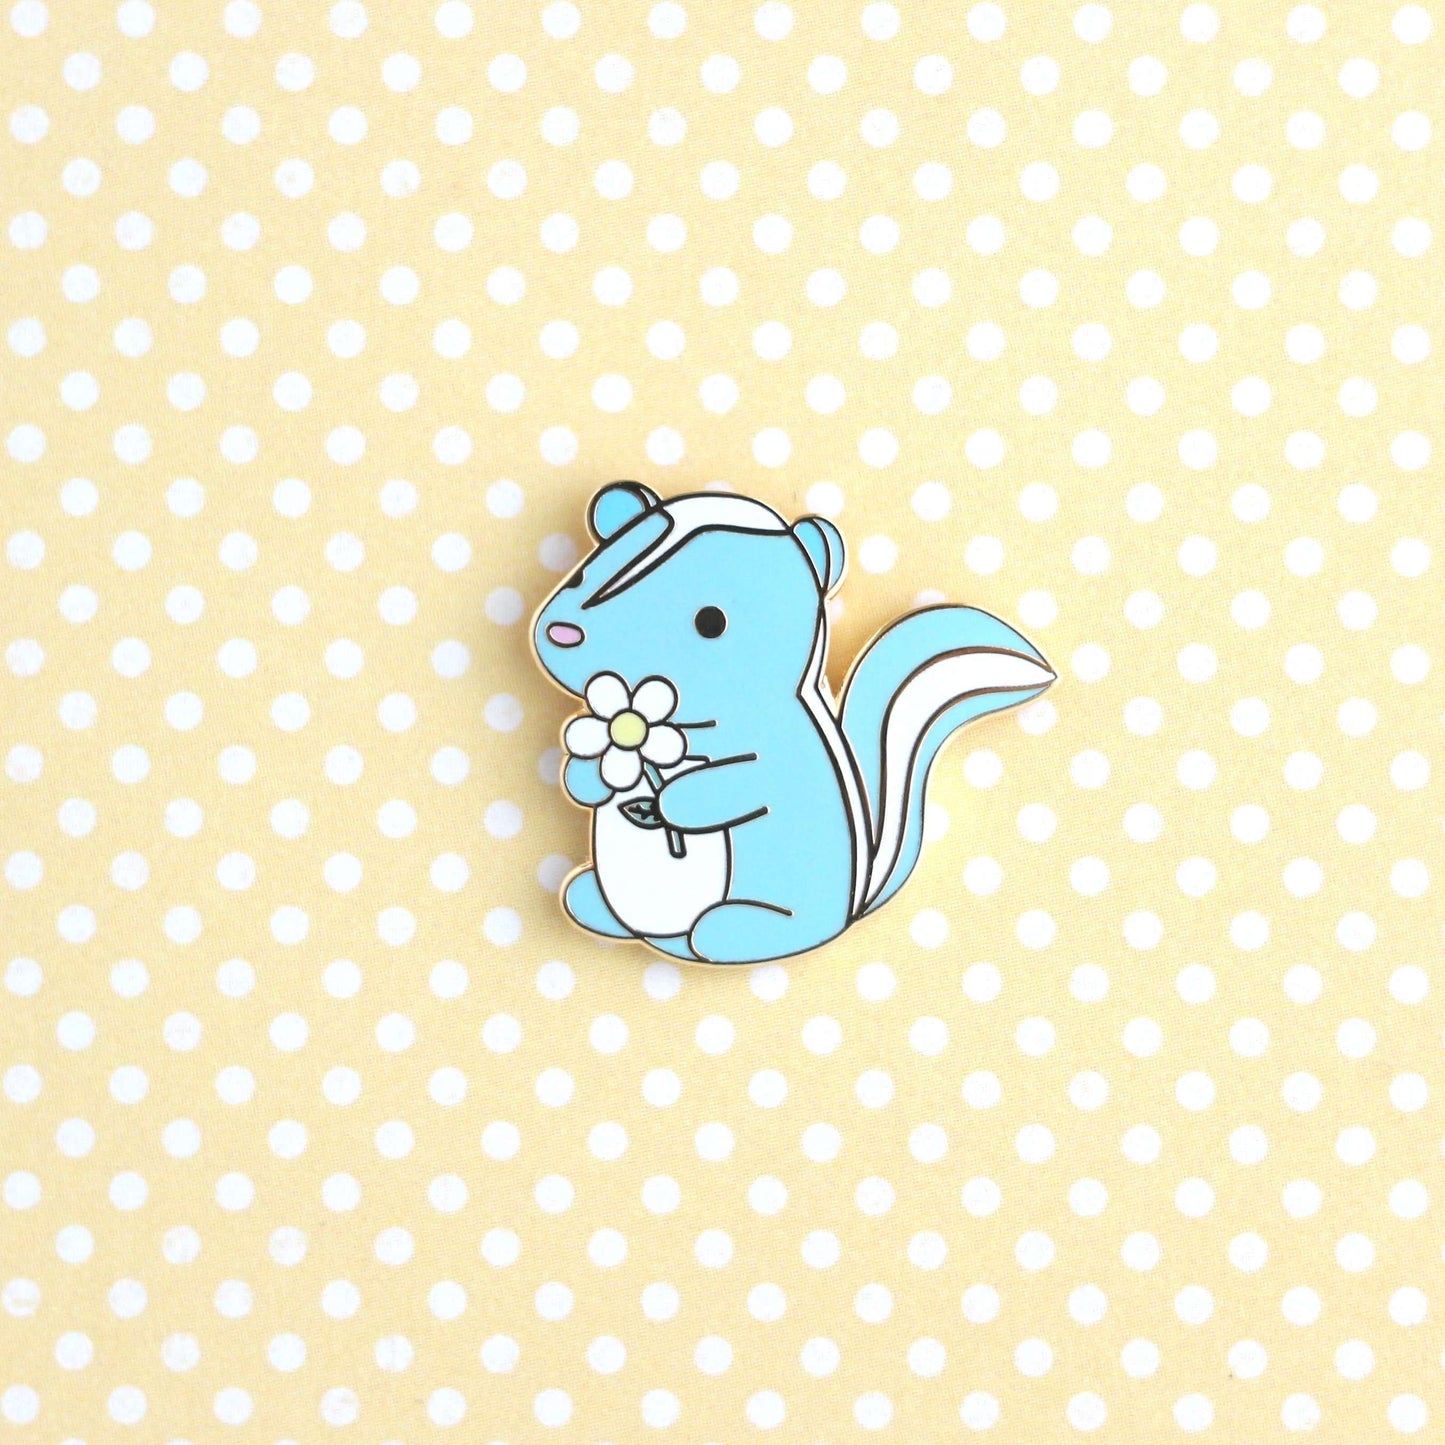 Skunk and Daisy Enamel Pin (Turquoise Variant) - Skunk Pin for Backpack